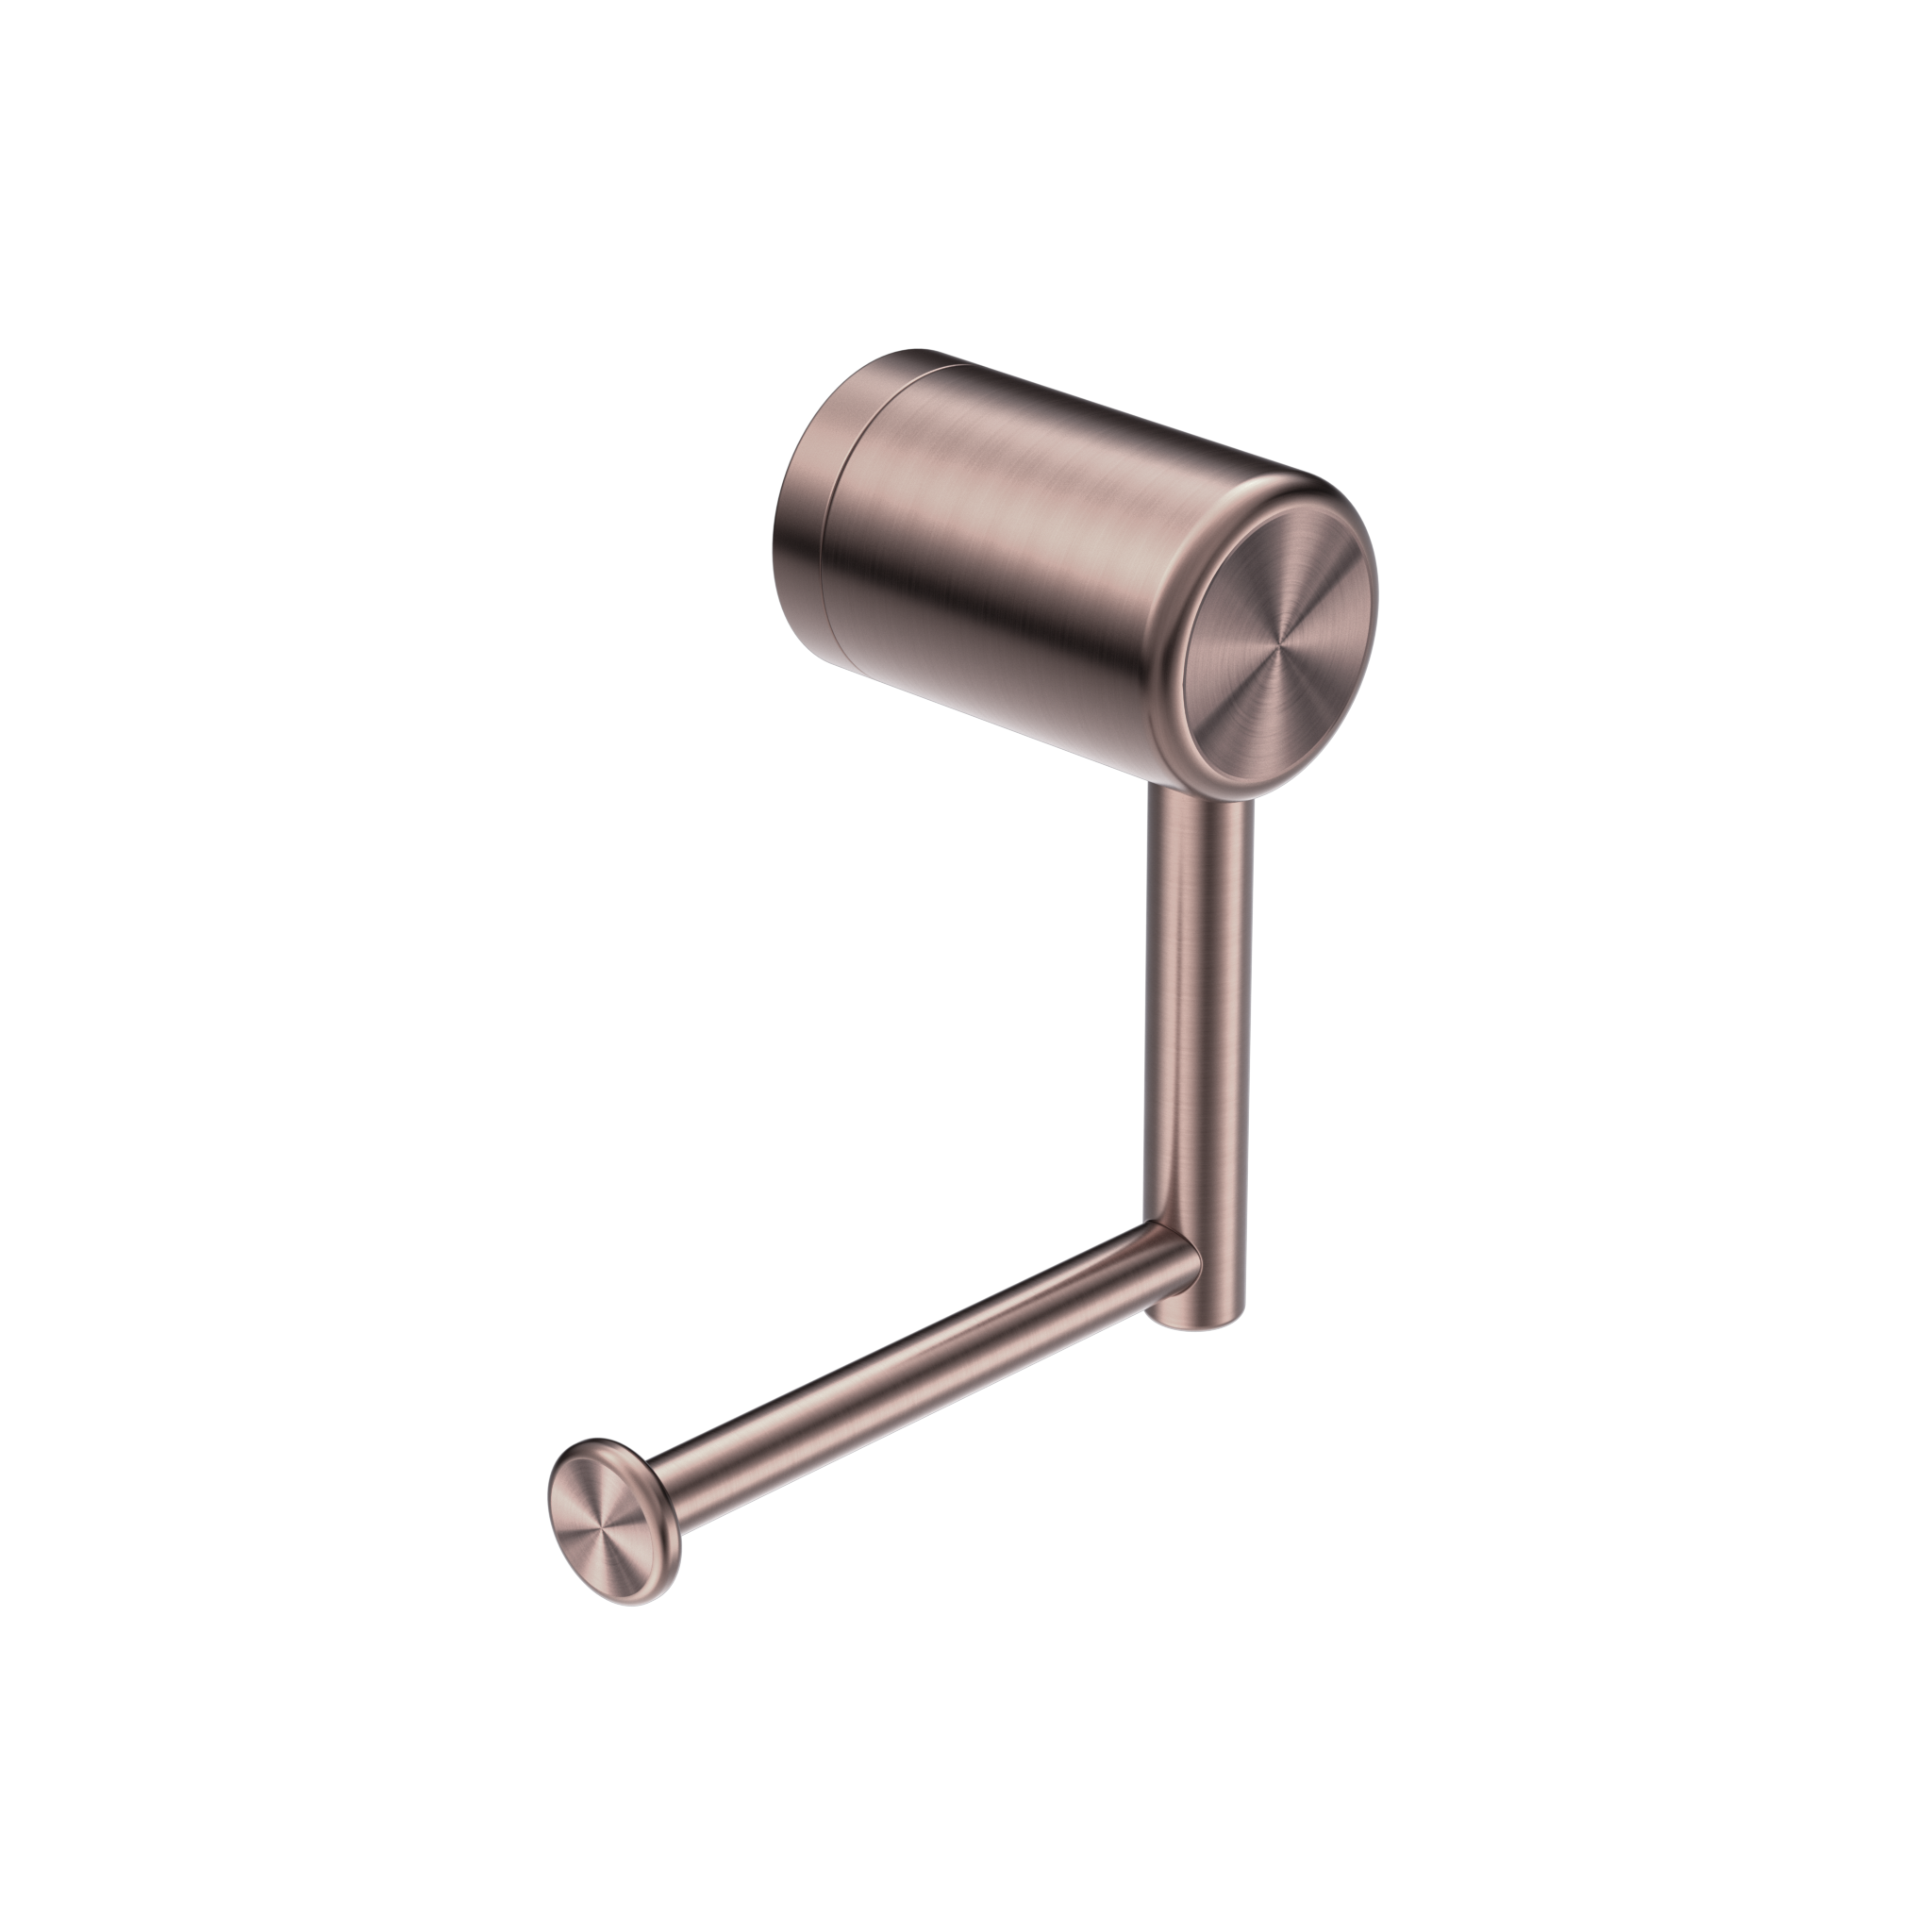 CALIBRE MECCA HEAVY DUTY TOILET ROLL HOLDER BRUSHED BRONZE